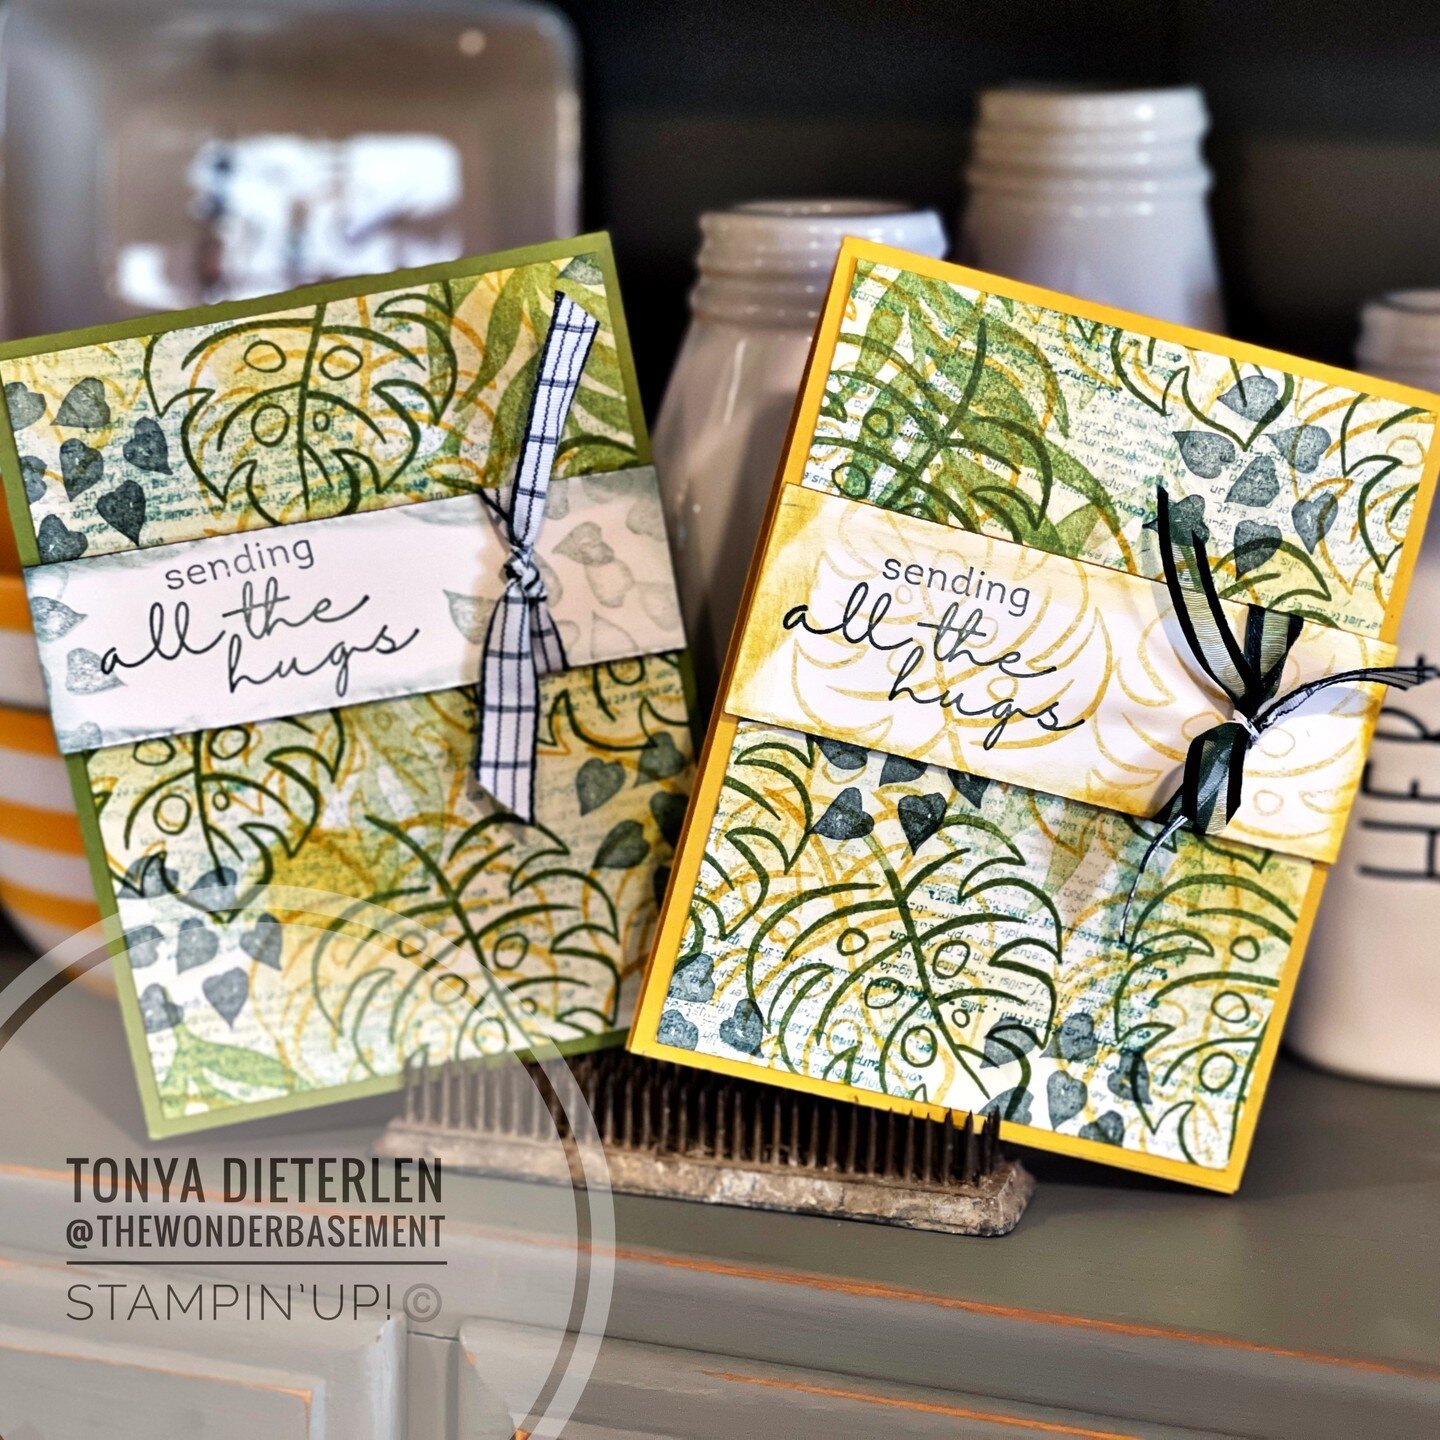 Collage Stamping at it's finest. It's so easy, and you can create in so many styles. #stampinup #artisticallyinked #instacolorful #monochromatic #monomood #prep #colorworld  #glitterlover #card #handmade_bestwork #handmadewithheart #stampinupblog #pa